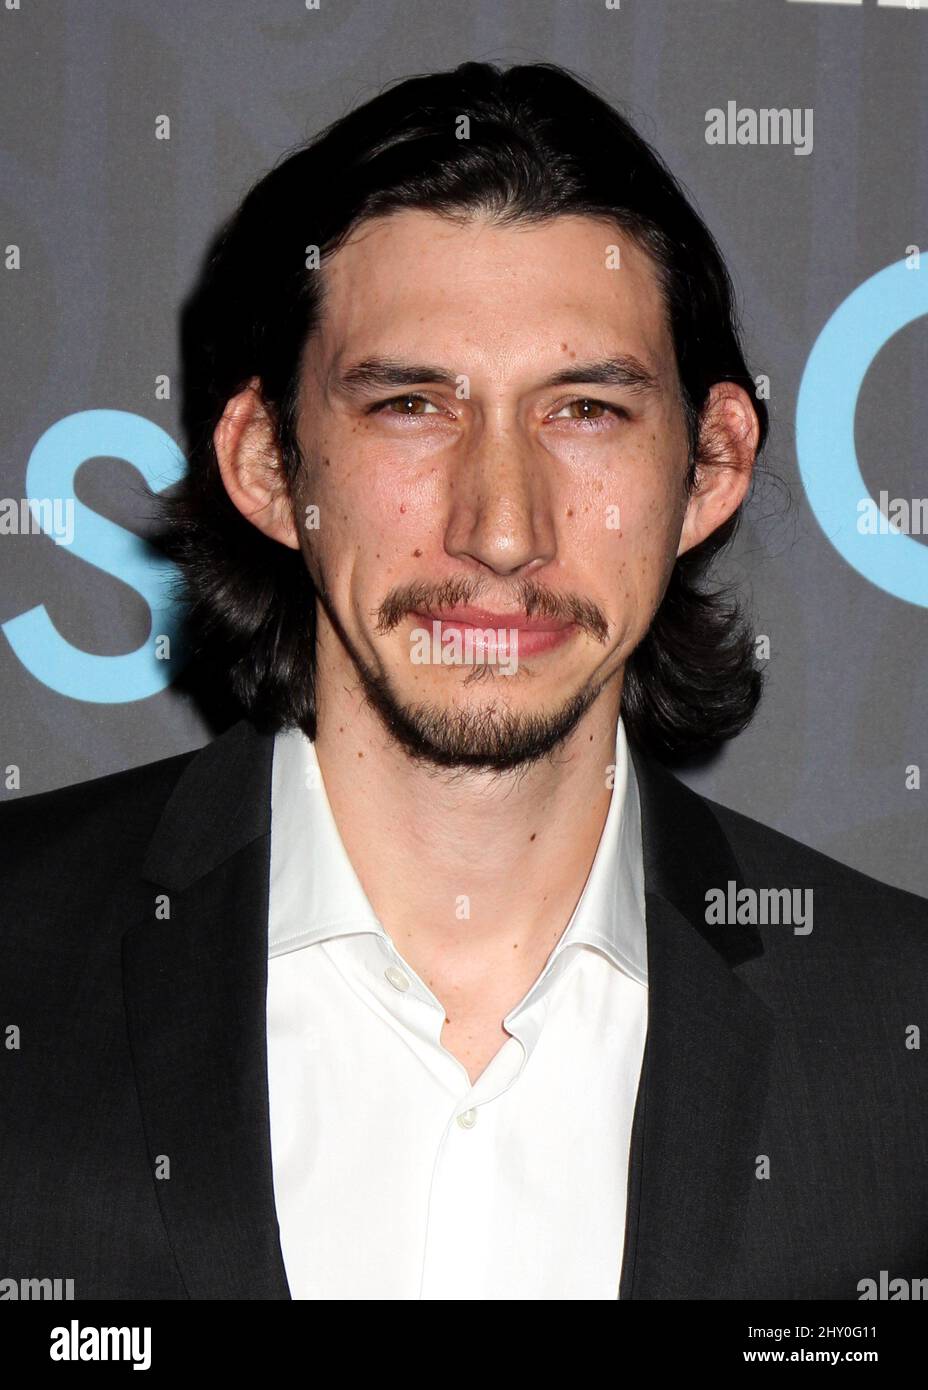 Adam Driver attending the premiere of season 2 of 'Girls' in NEw York. Stock Photo